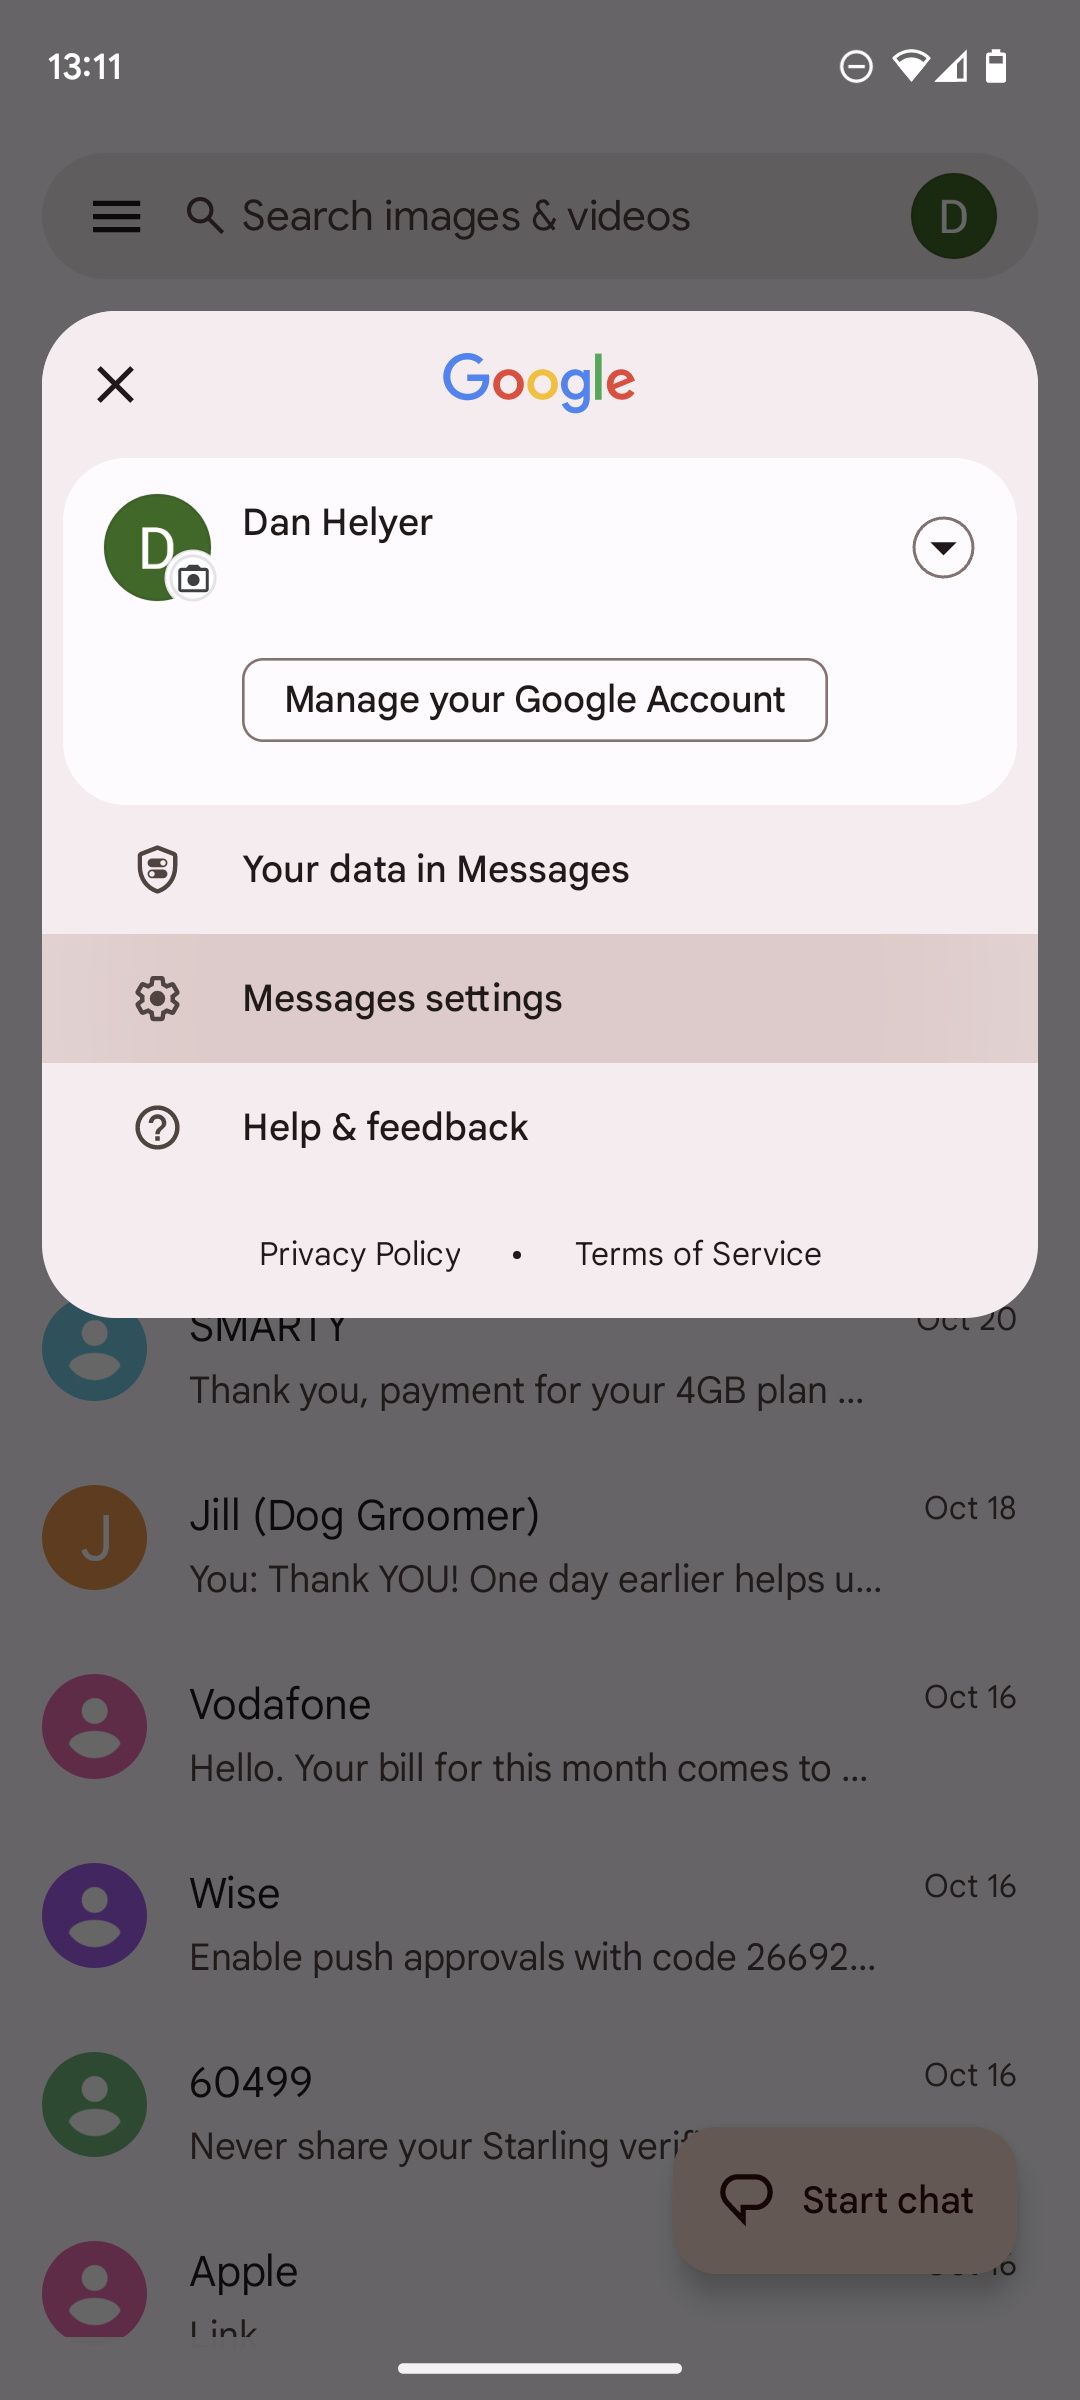 1. Messages settings option in Android